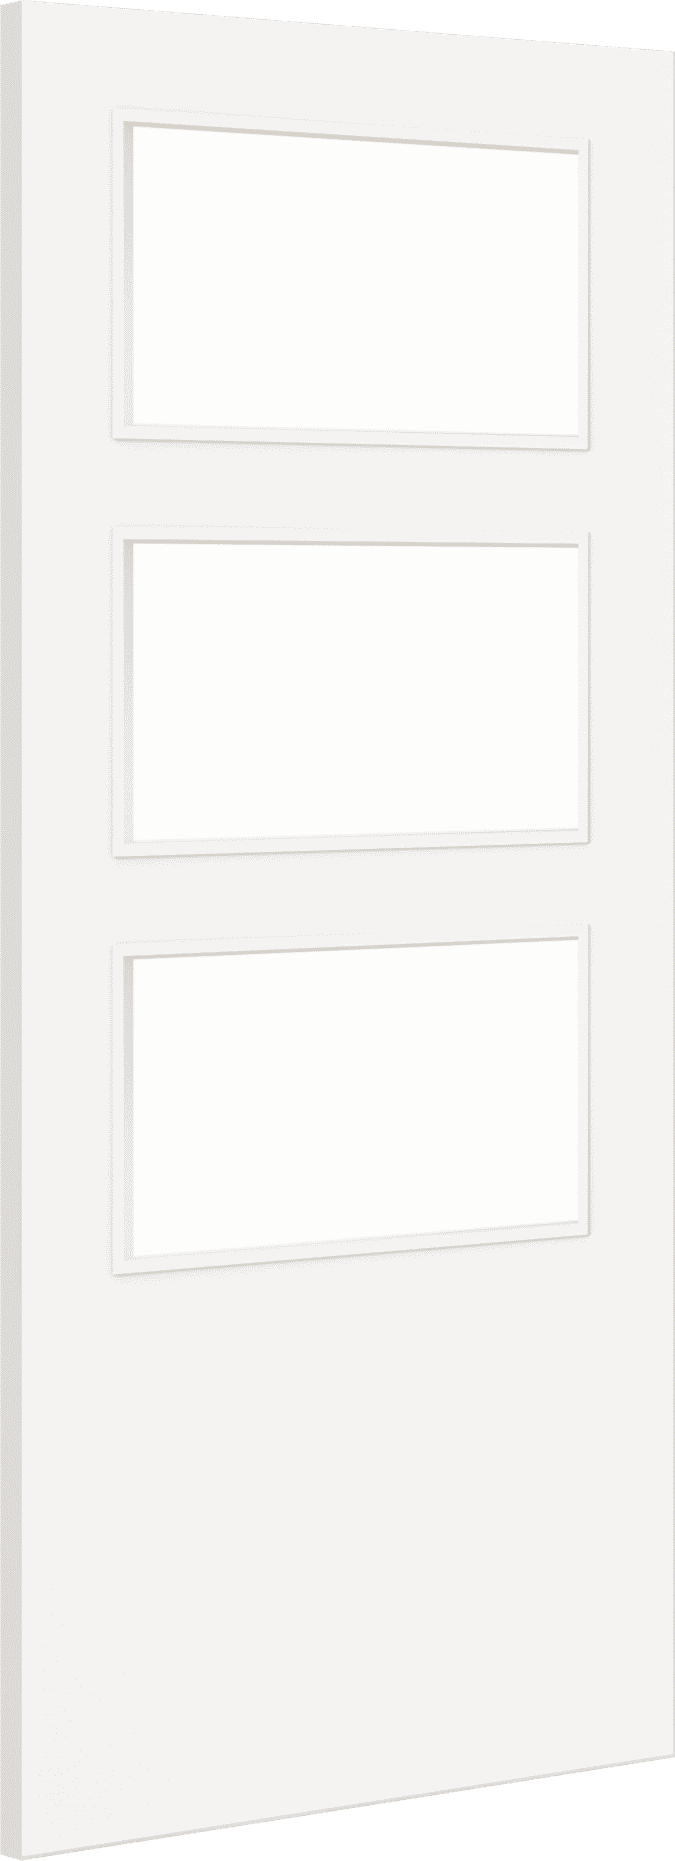 2040mm x 826mm x 44mm Architectural Paint Grade White 03 Clear Glazed Fire Door Blank